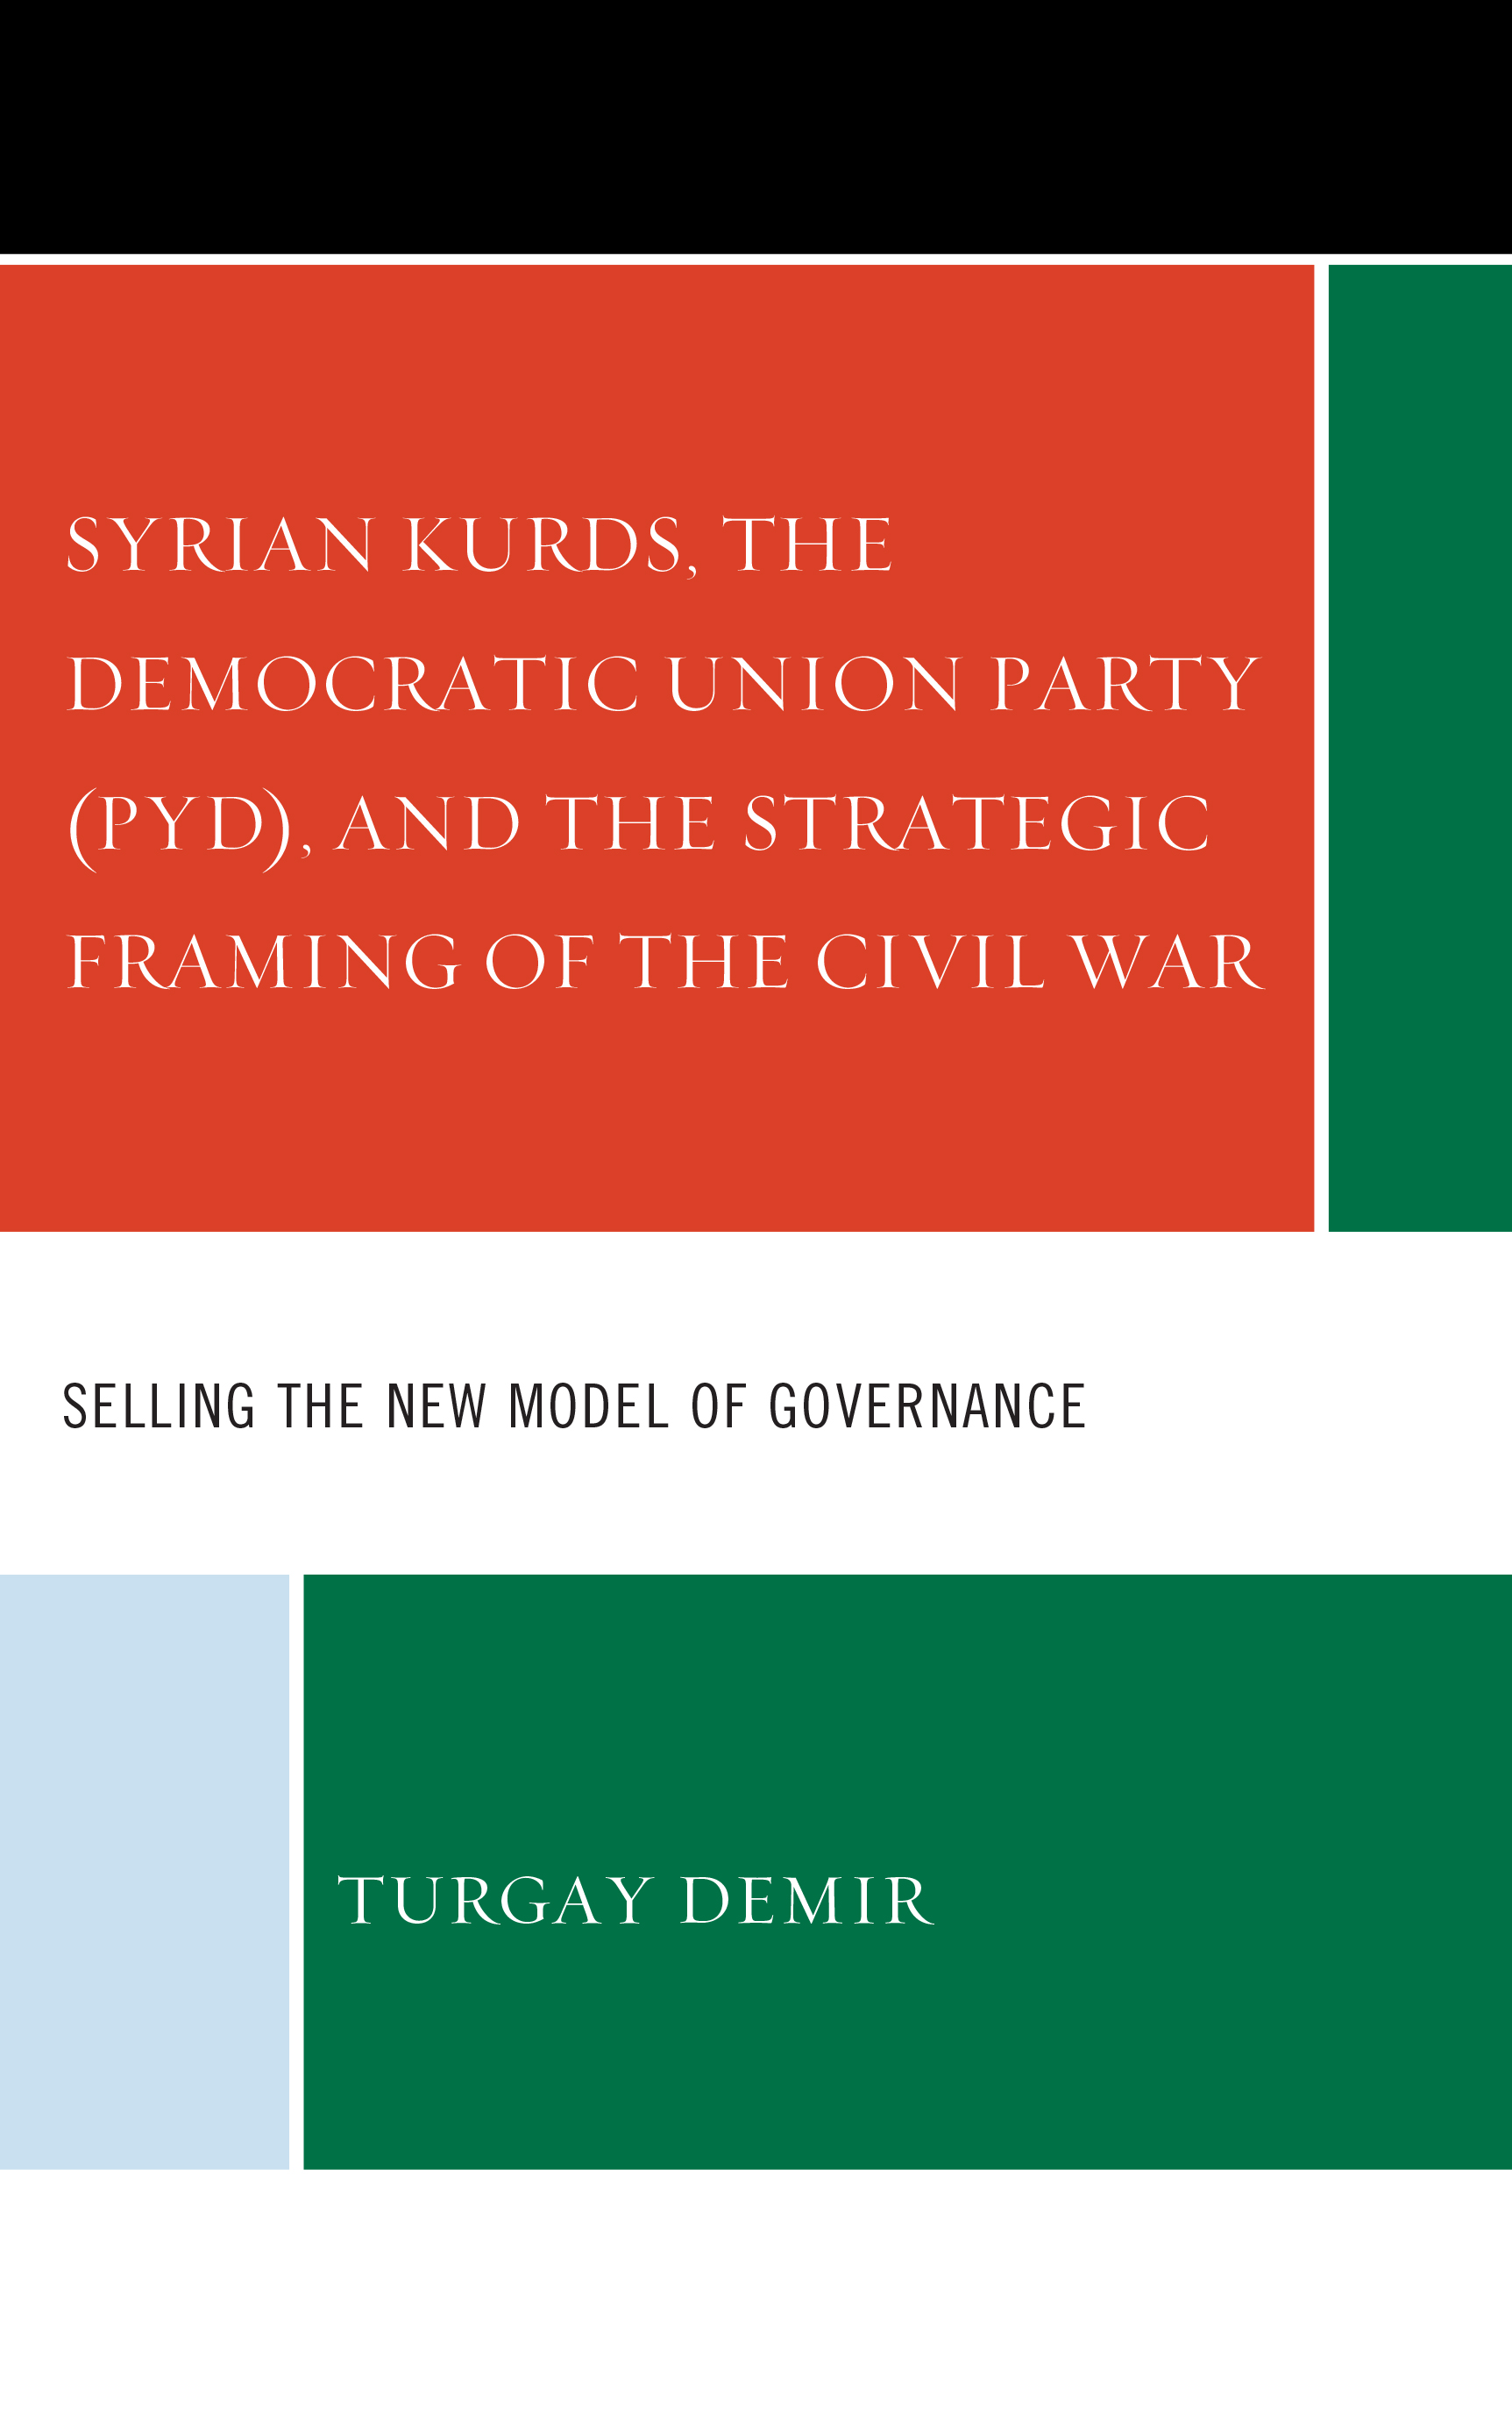 Syrian Kurds, the Democratic Union Party (PYD), and the Strategic Framing of the Civil War: Selling the New Model of Governance